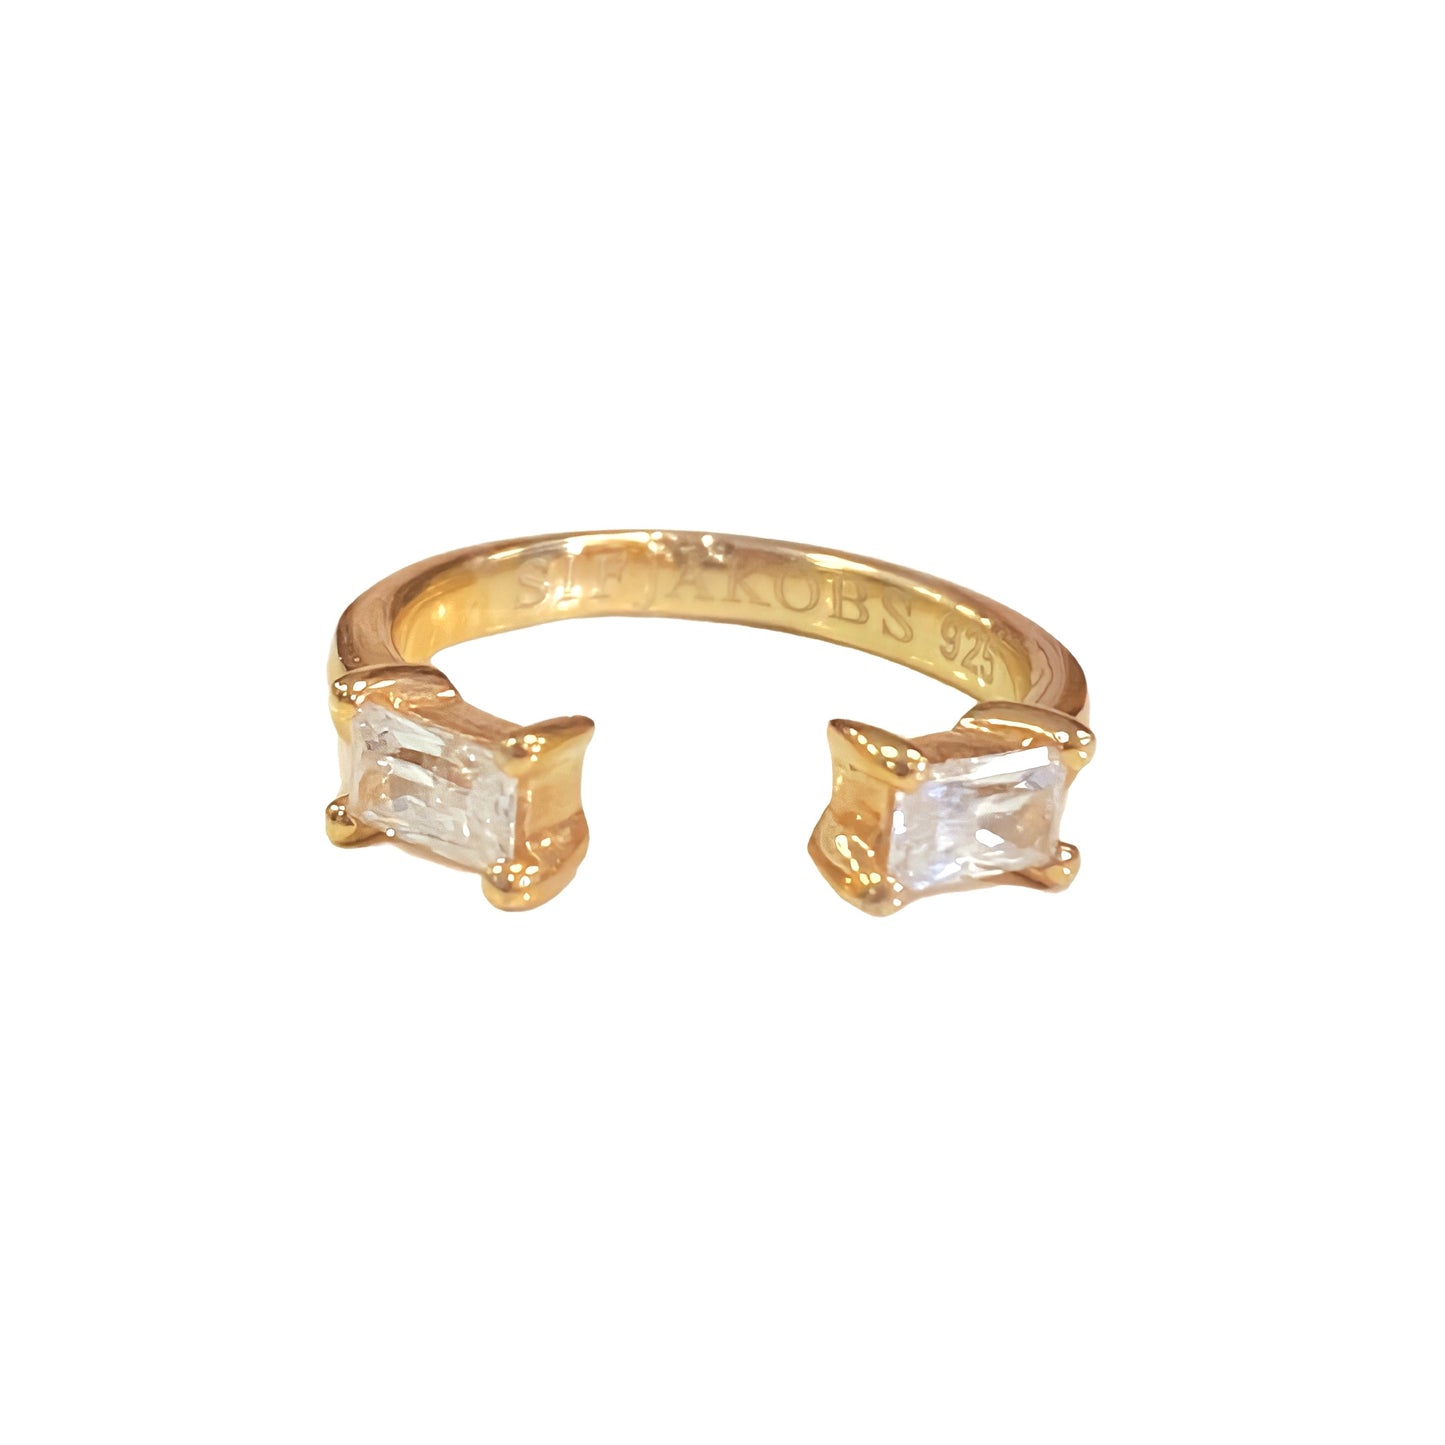 Sif Jakobs Antella Altro Piccolo Ring - 18ct Gold Plated Sterling Silver with White Zirconia - Adjustable